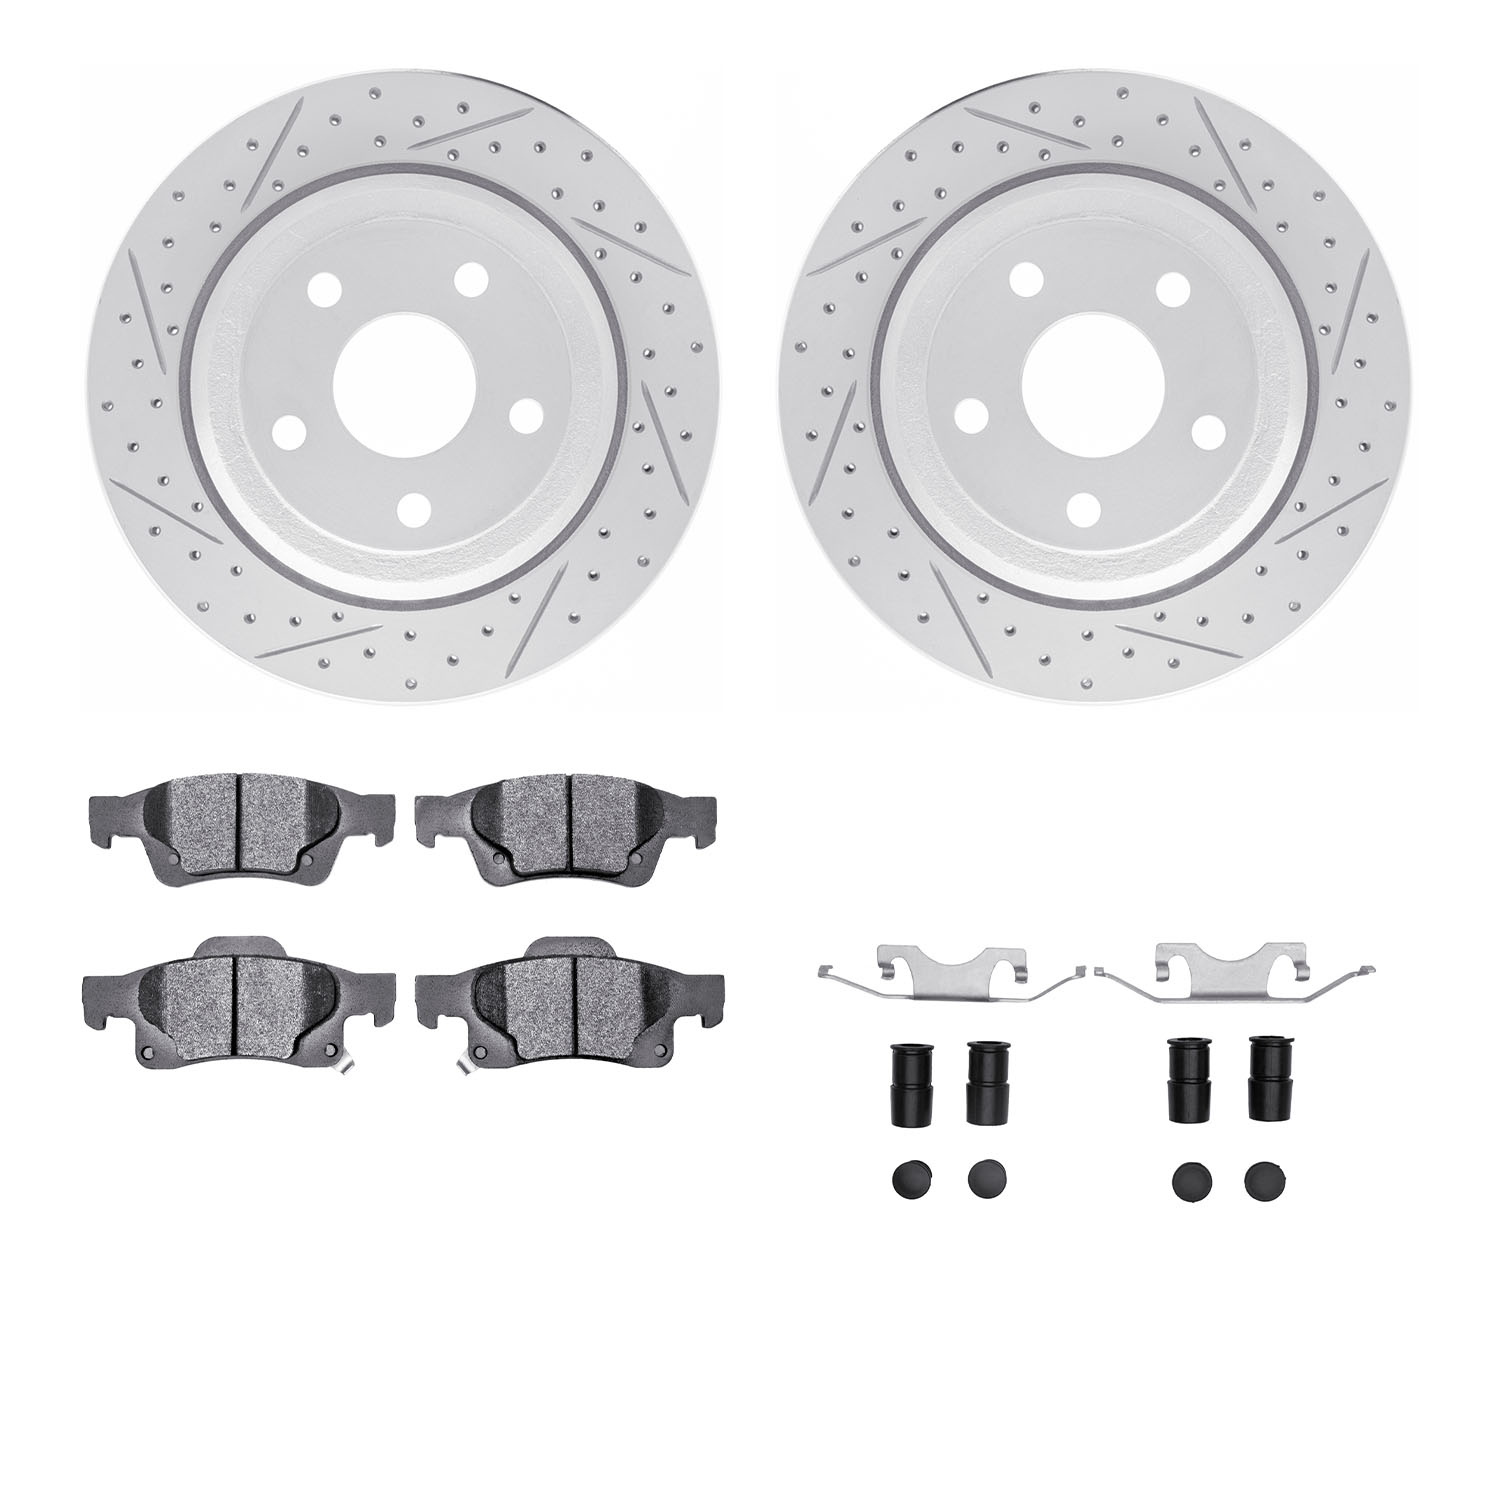 2212-42003 Geoperformance Drilled/Slotted Rotors w/Heavy-Duty Pads Kit & Hardware, Fits Select Mopar, Position: Rear